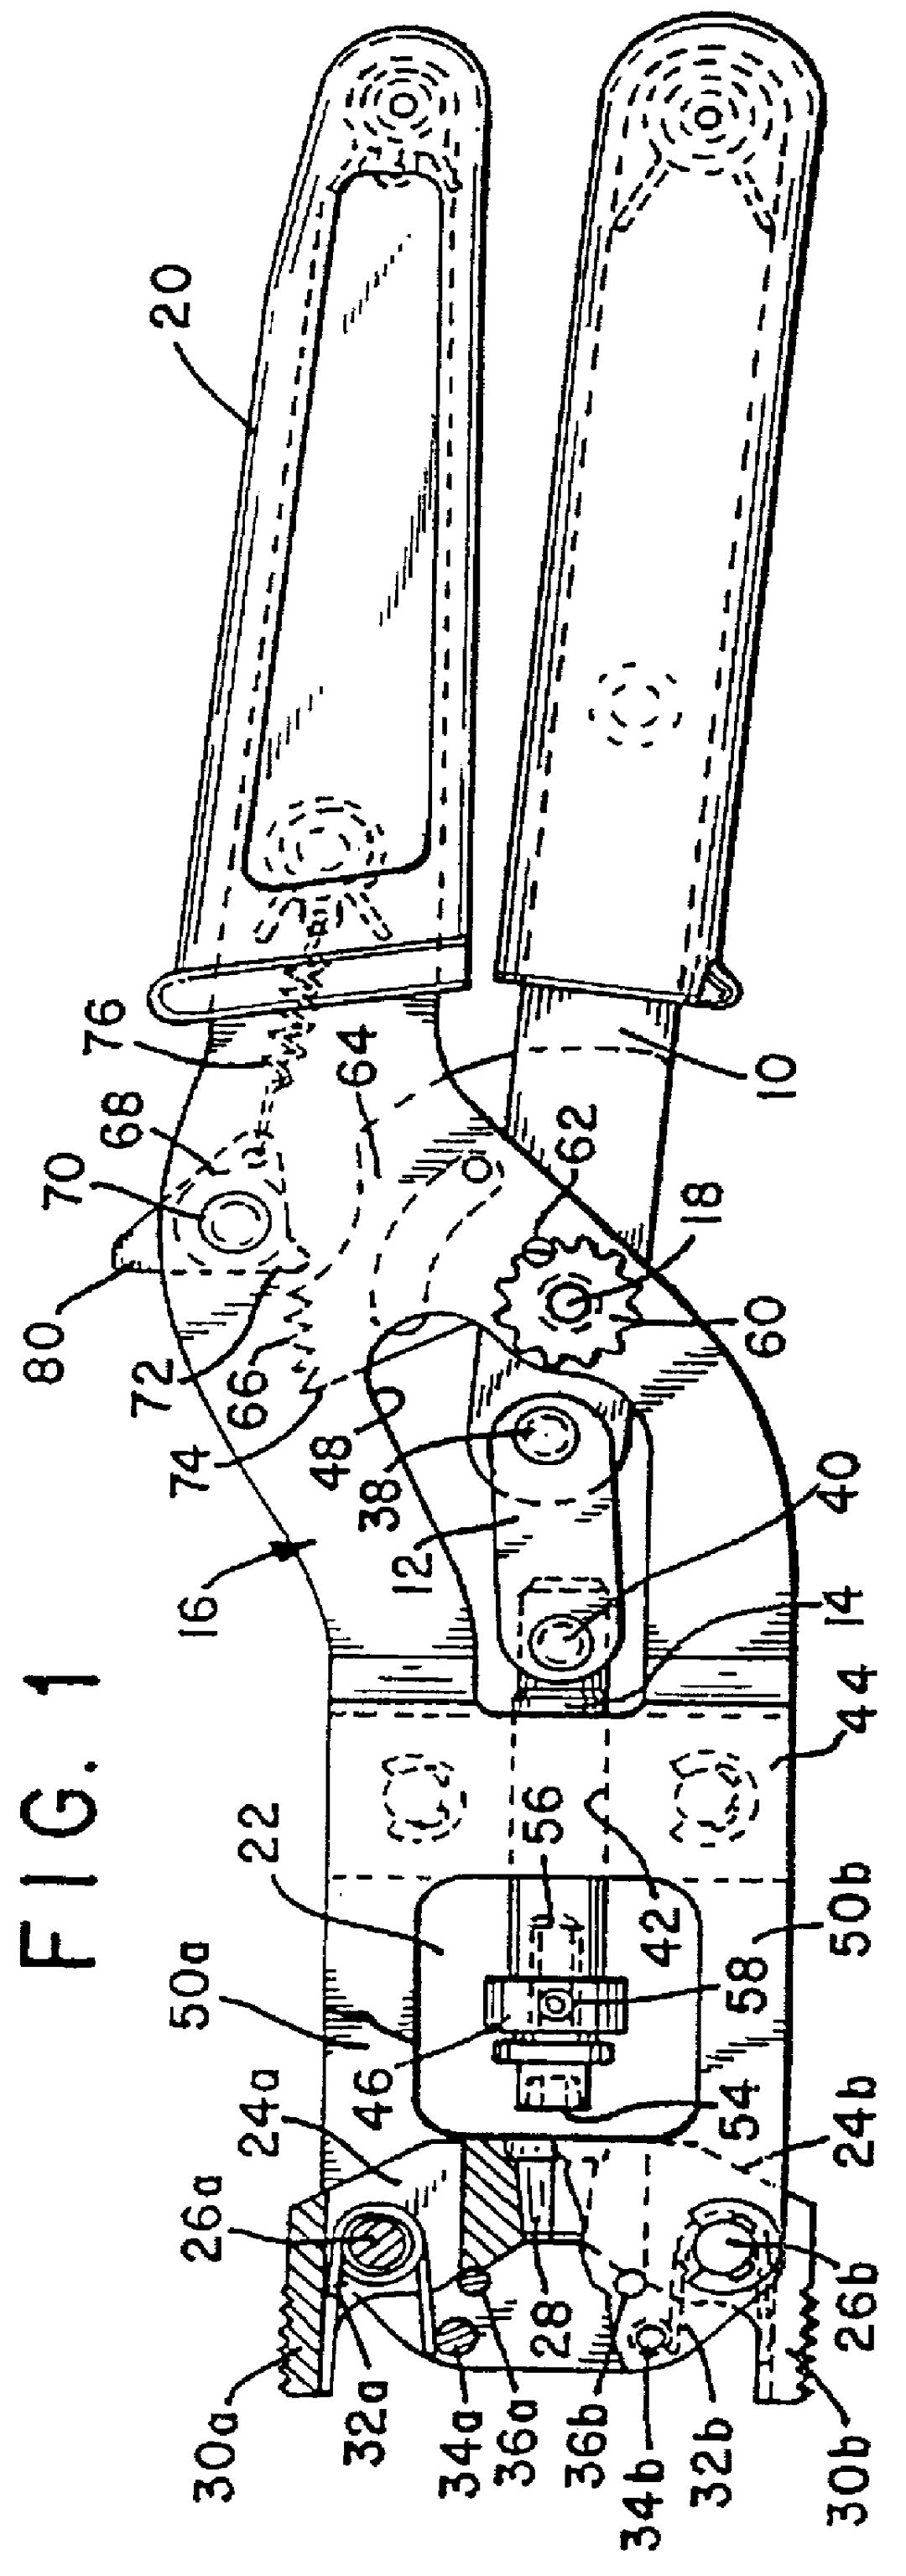 Radial taper tool for compressing electrical connectors